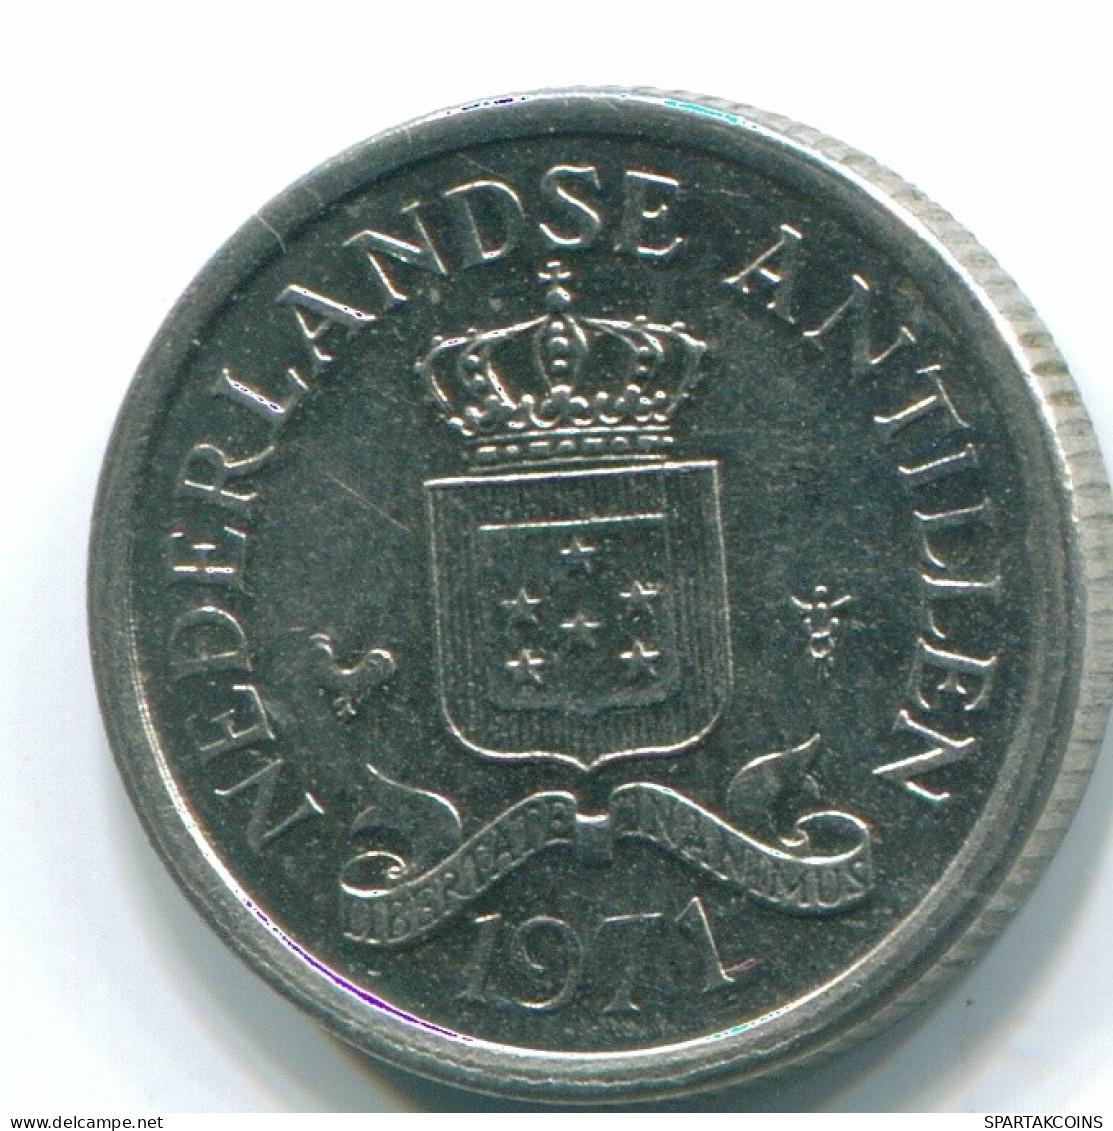 10 CENTS 1971 NETHERLANDS ANTILLES Nickel Colonial Coin #S13468.U.A - Antille Olandesi